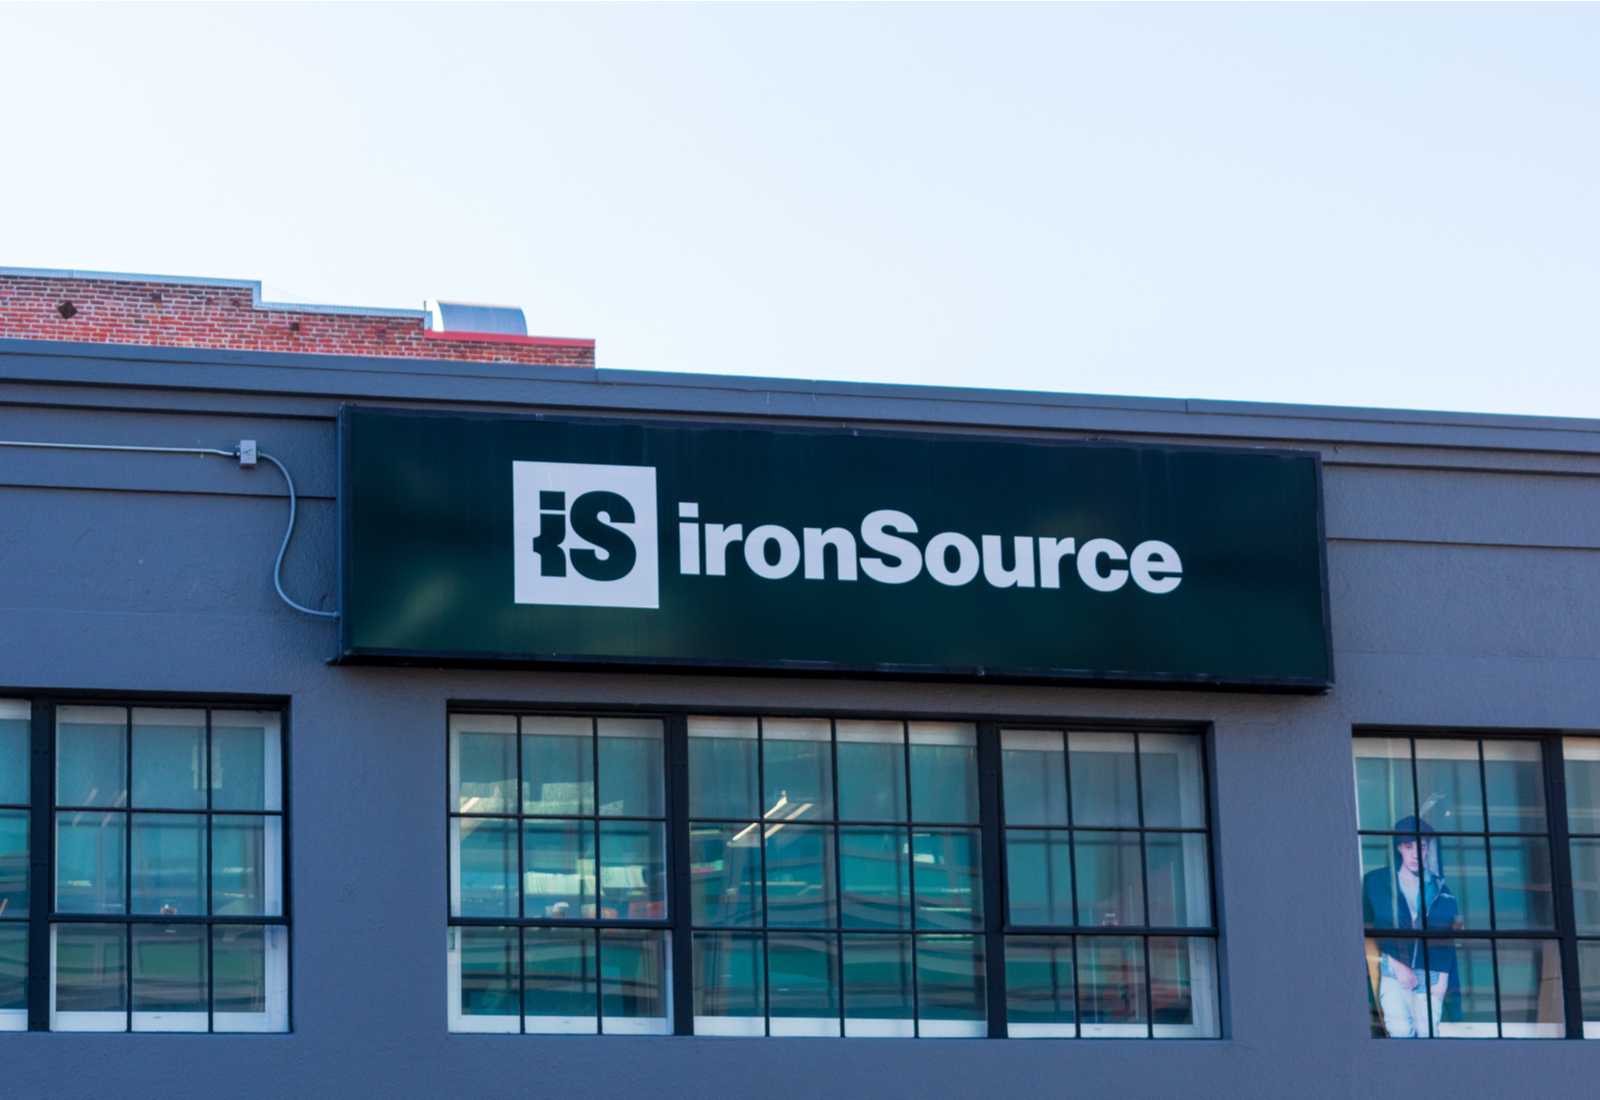 ironSource’s office in Silicon Valley. Photo by Michael Vi via Shutterstock.com